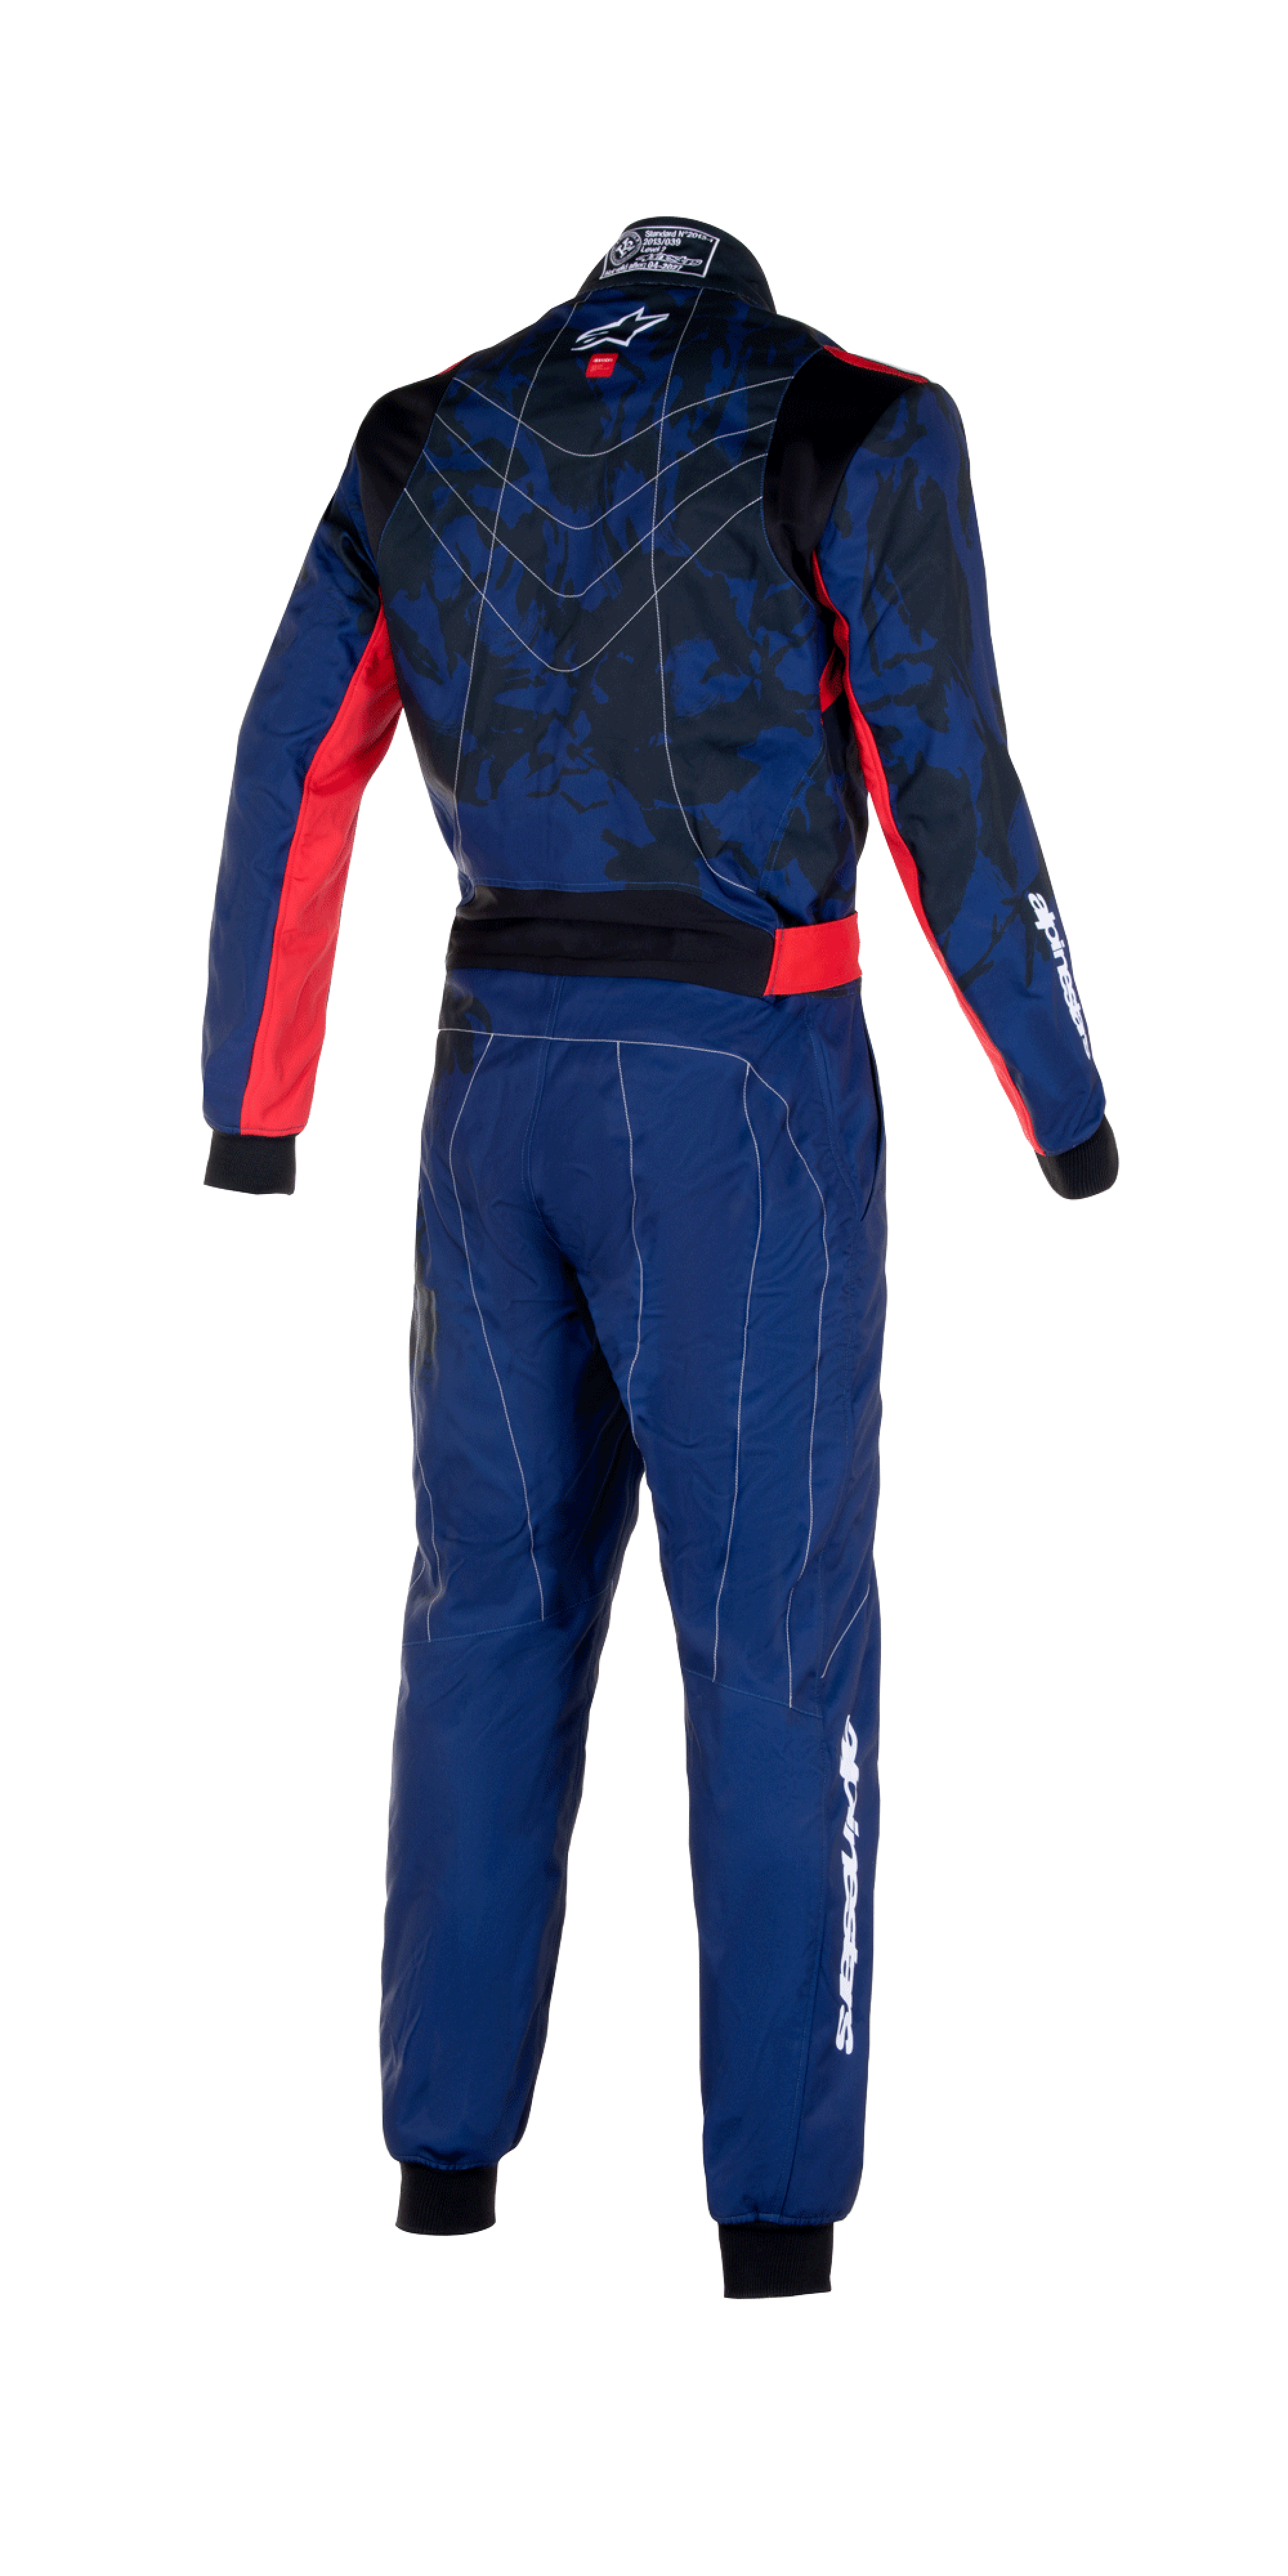 Youth KMX-9 V2 Graphic 5 Suit -